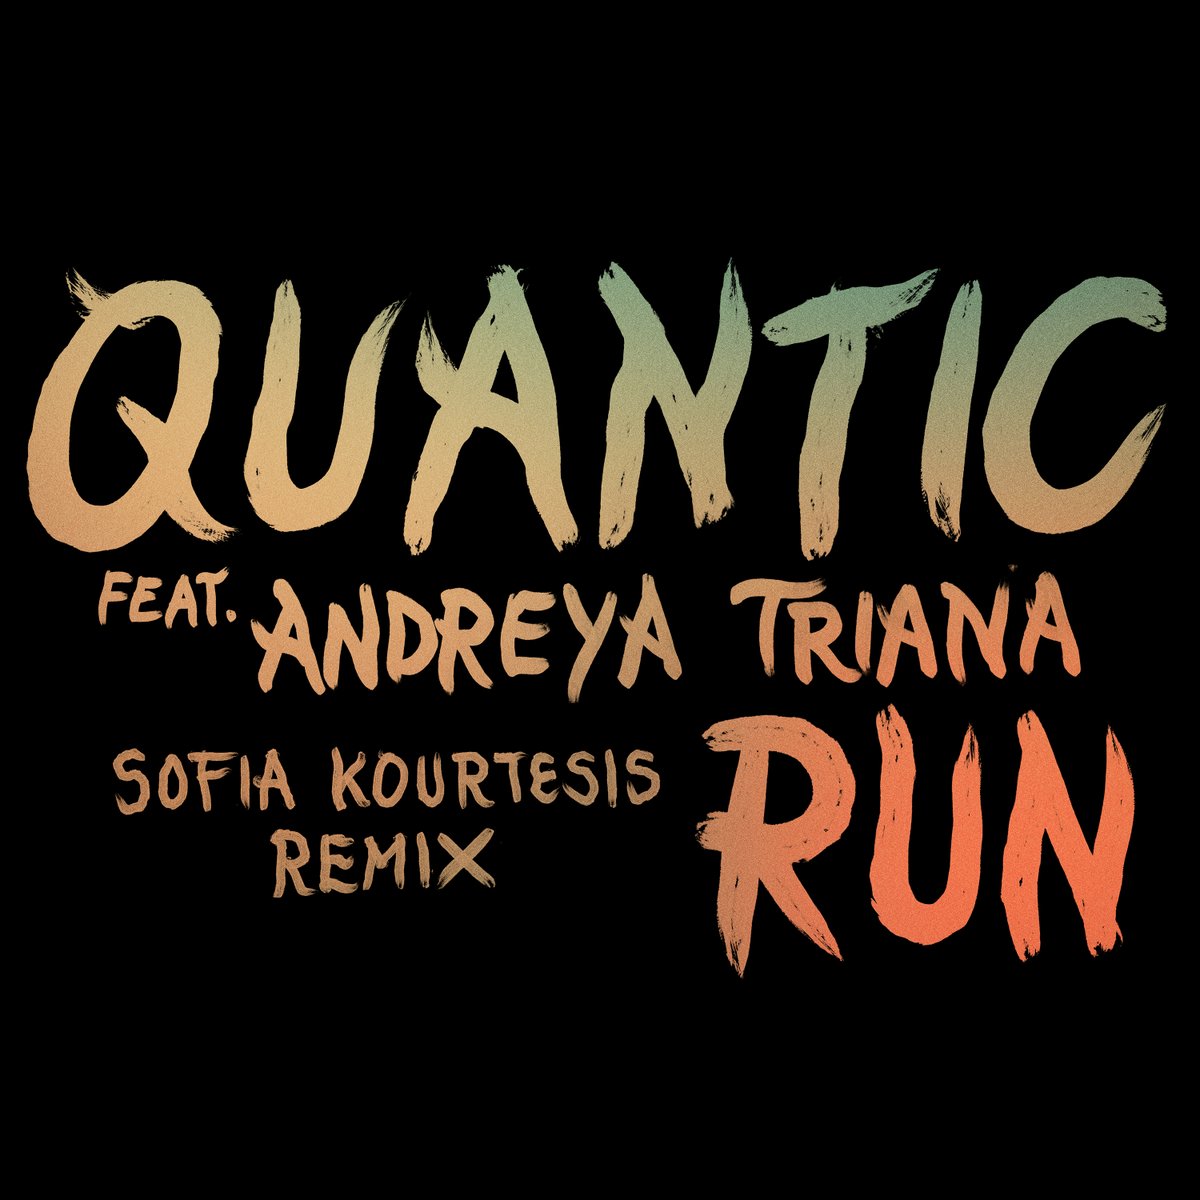 One for the ravers here! We've got none other than @SofiaKourtesis stepping up on remix duties for 'Run' feat. Andreya Triana. Dropping this Thursday. Pre-save is available now! quanticmusic.ffm.to/run-sofia-kour…